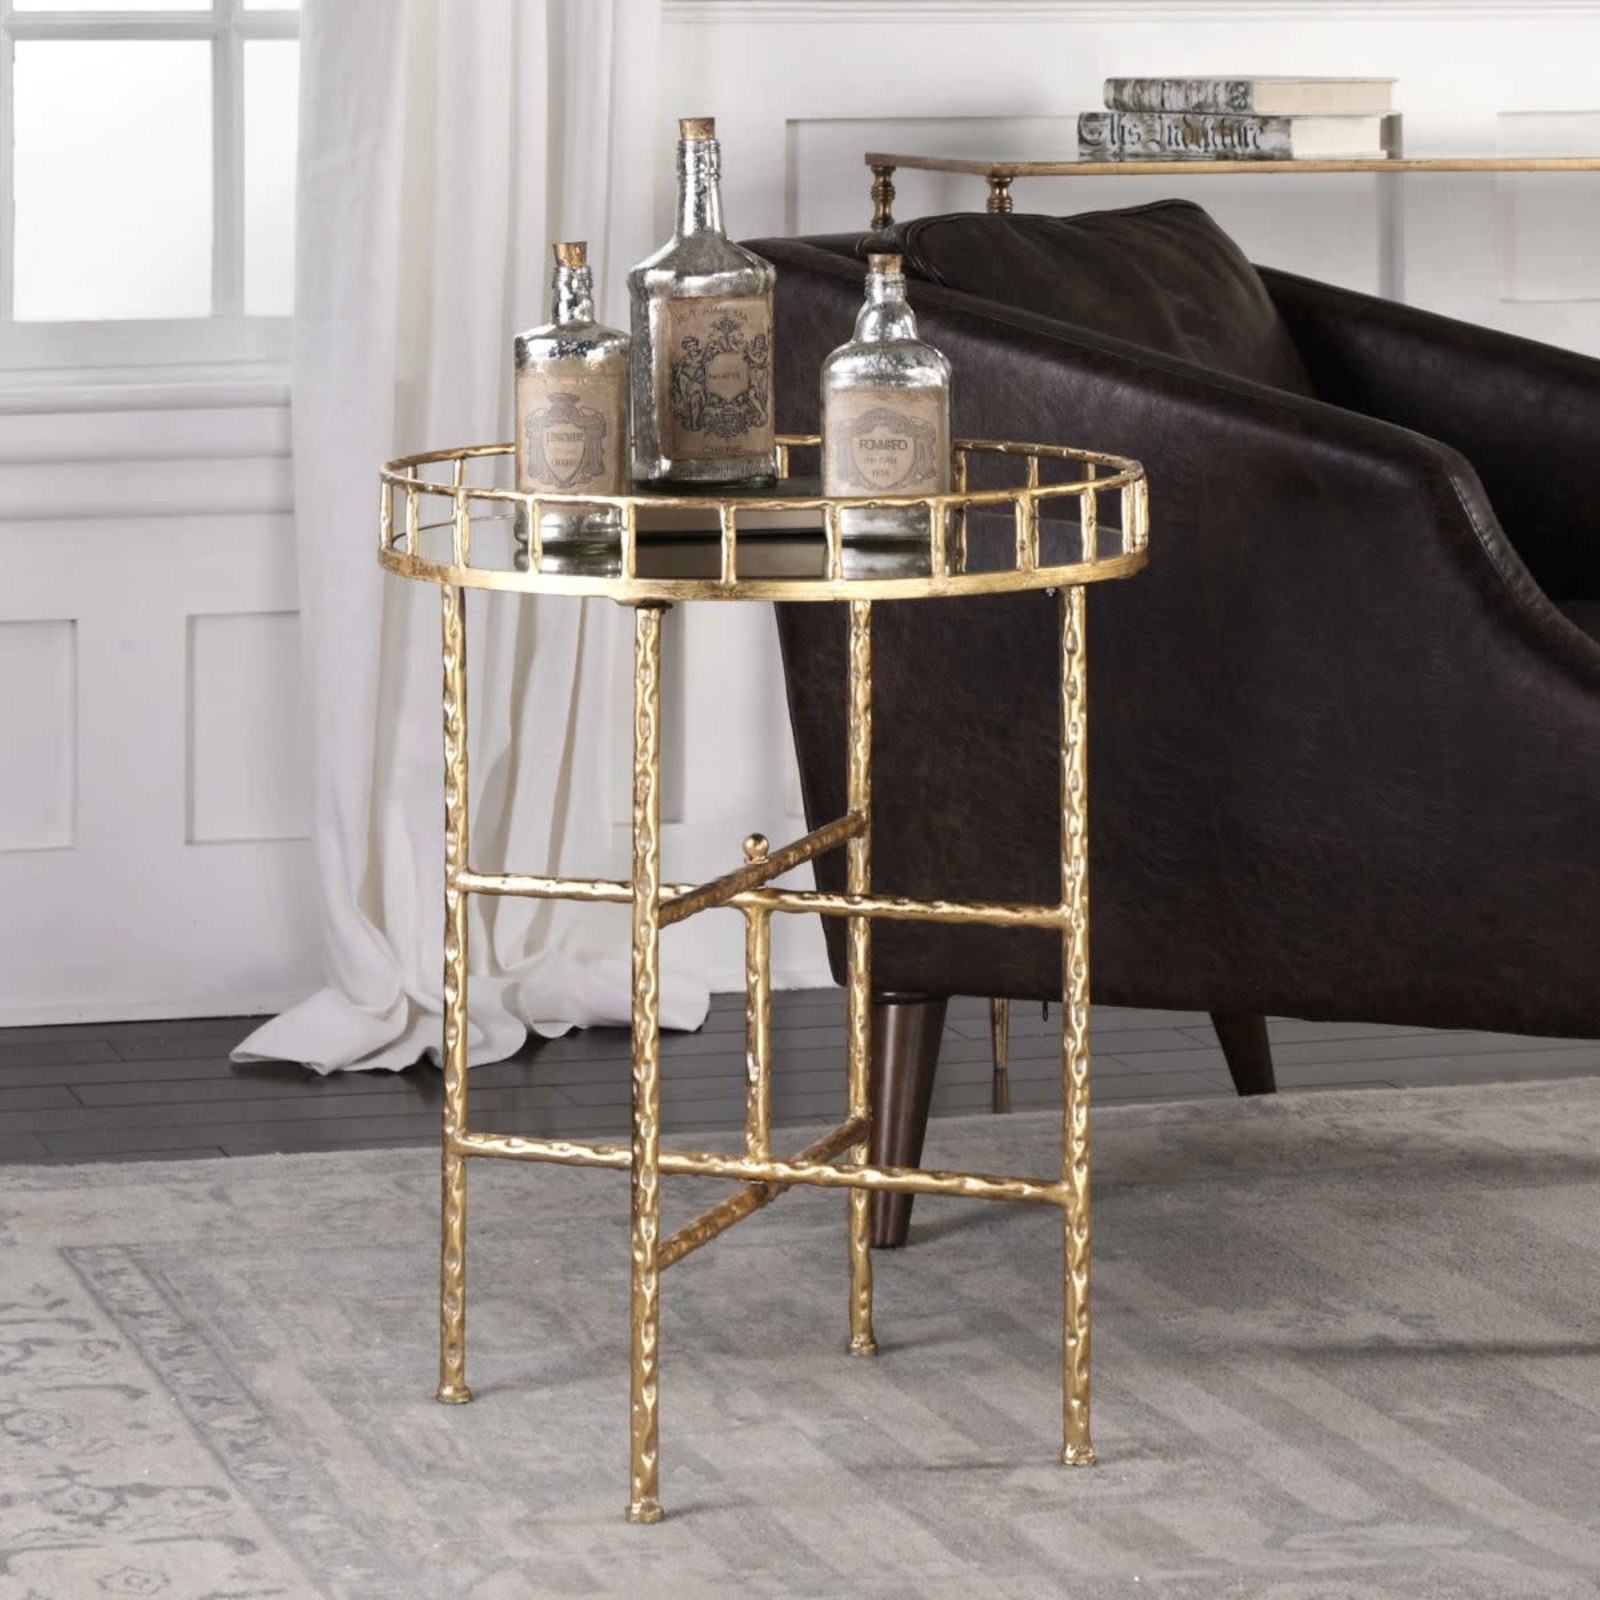 Uttermost TILLY ACCENT TABLE    #24711 loading=